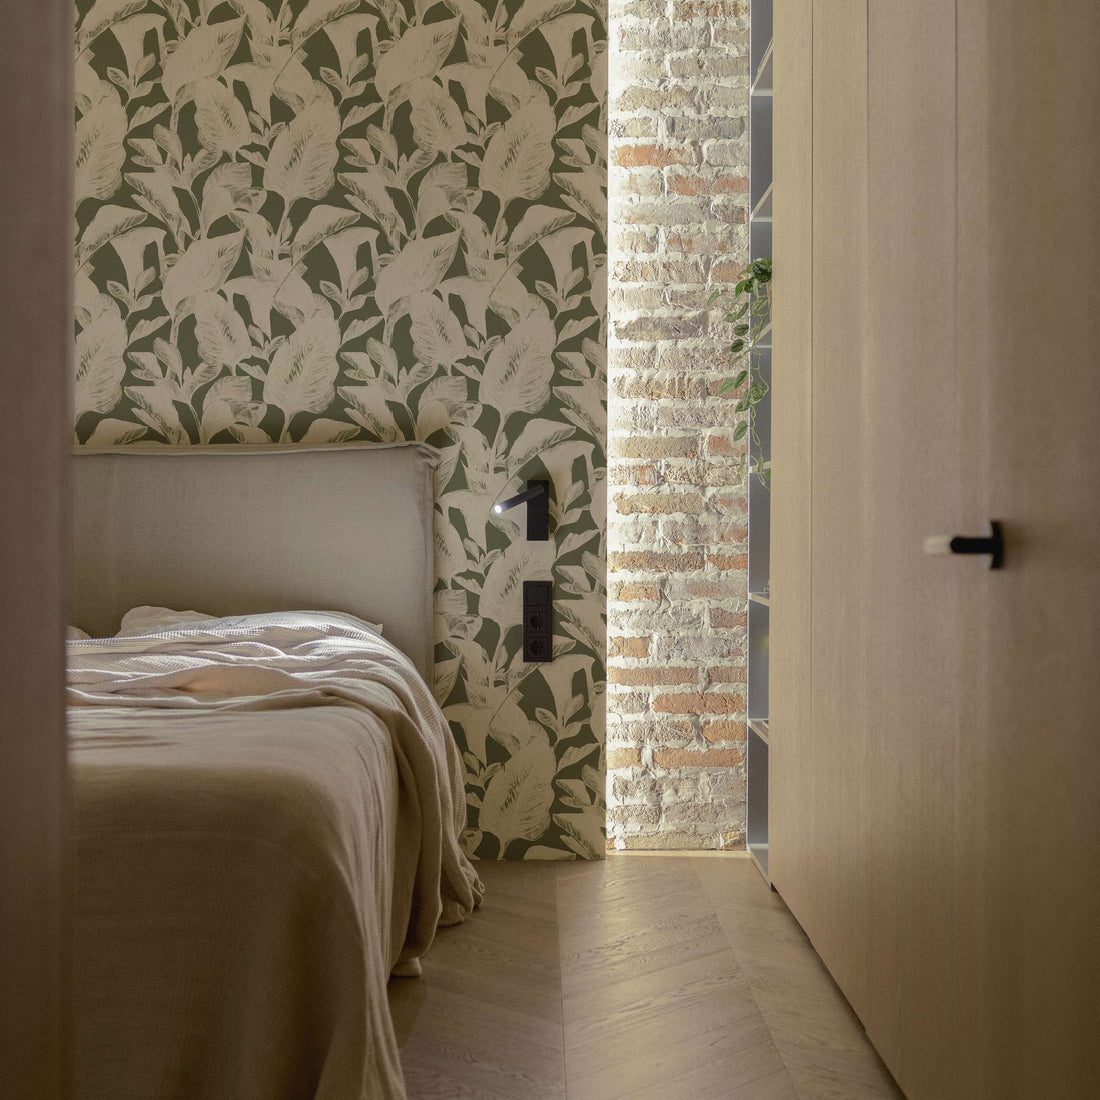 neutral bedroom interior design with green leaf print accent wall